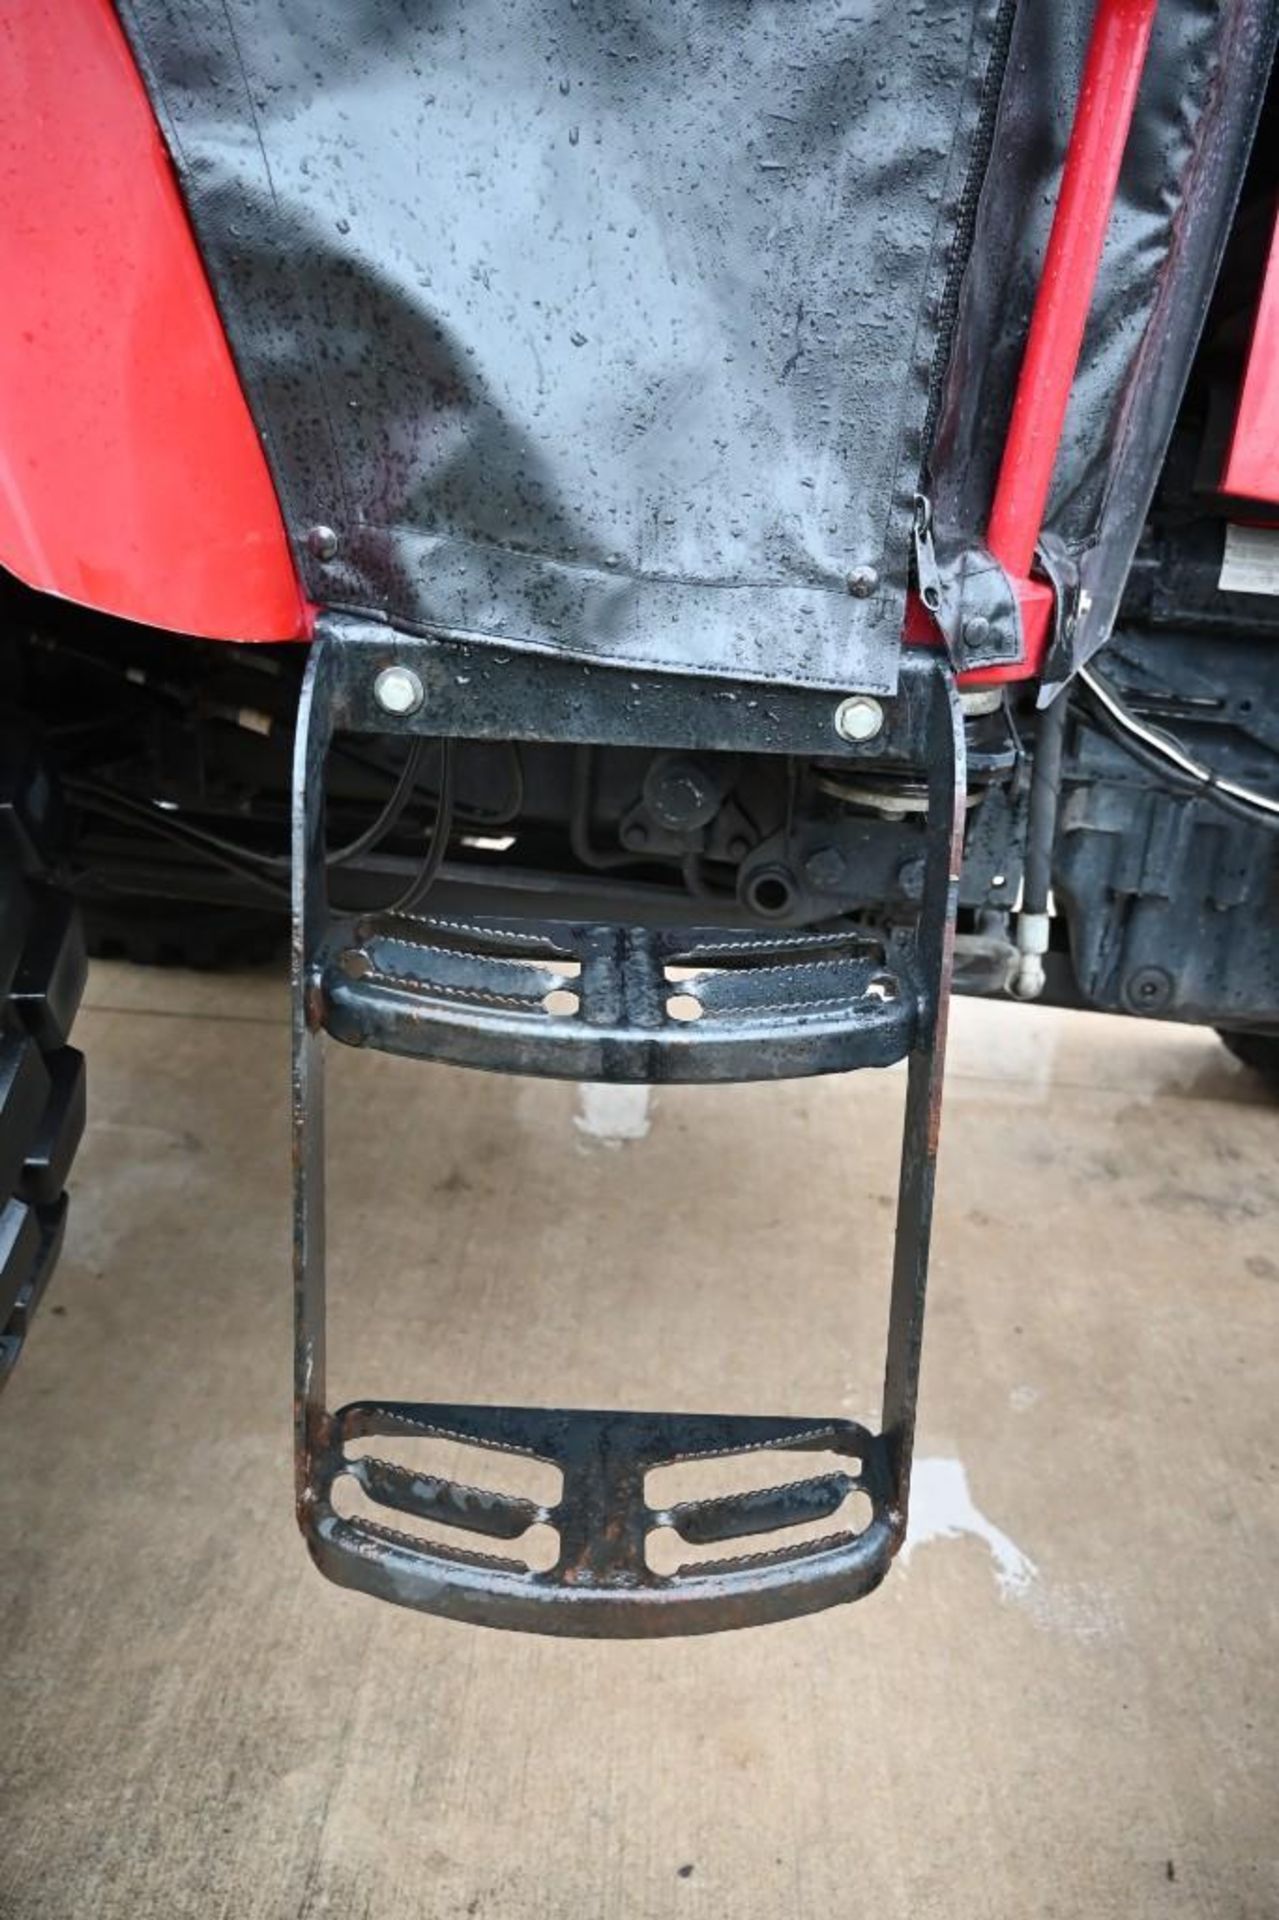 2015 Case IH 75C Tractor - Image 69 of 135